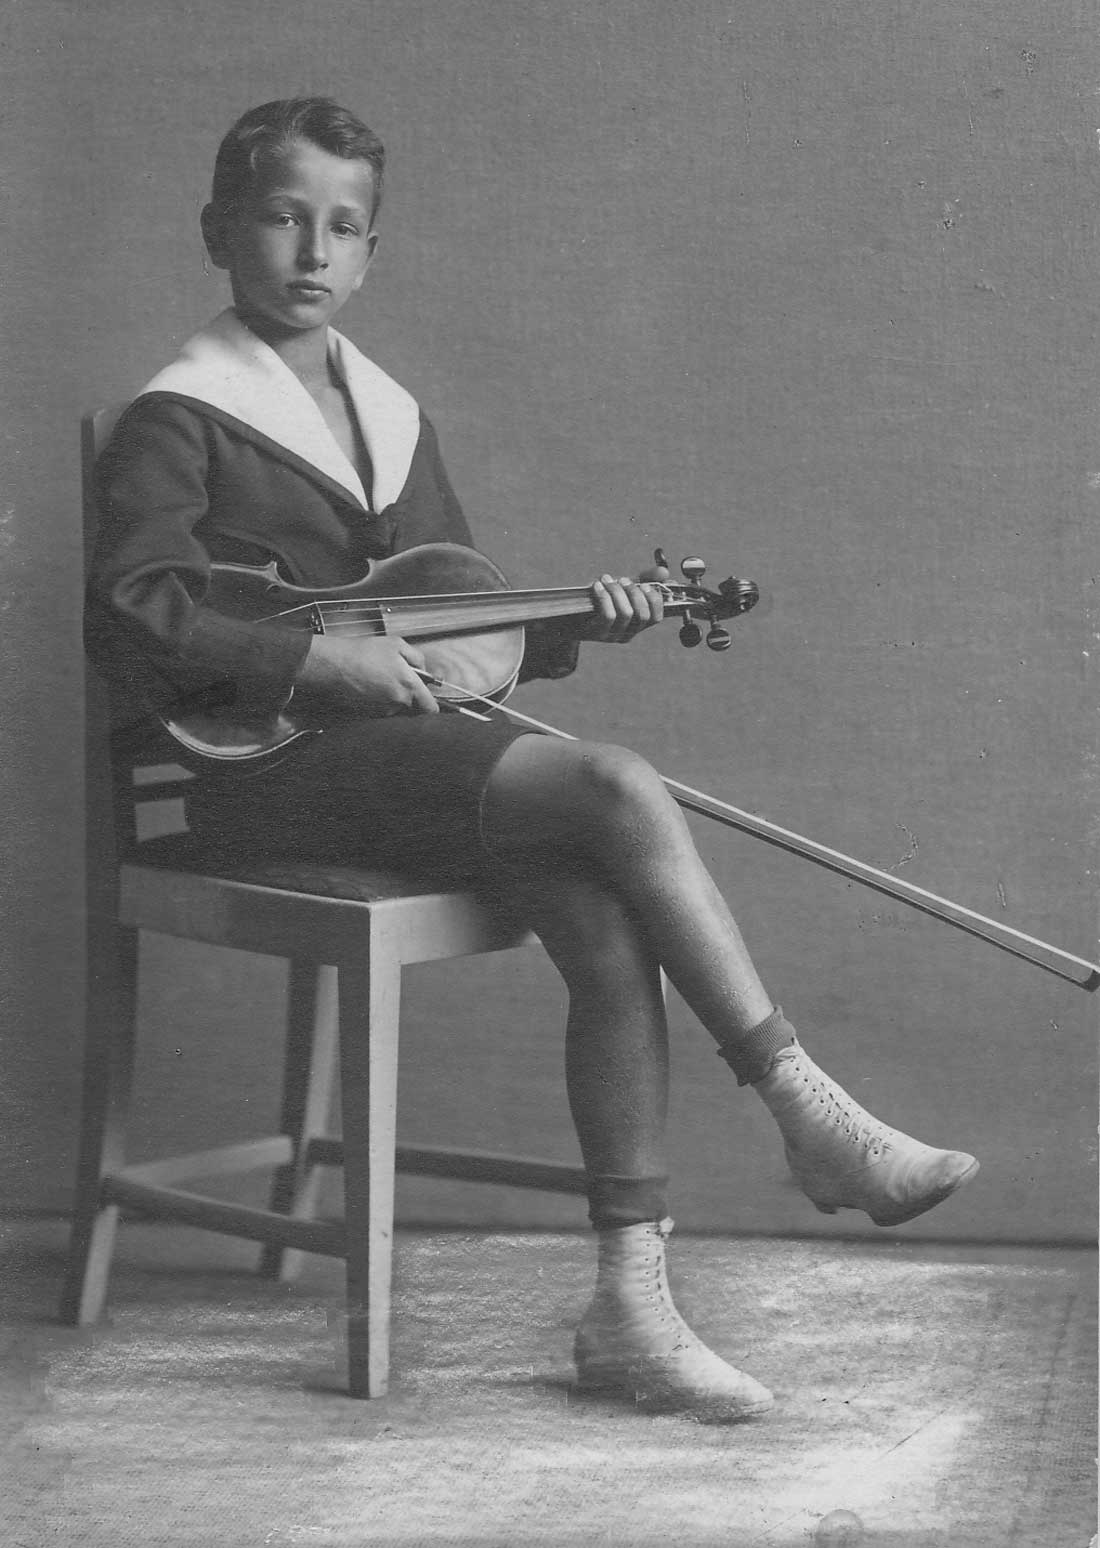 Werner knew already at the age of eight that he wanted to be a violin virtuoso